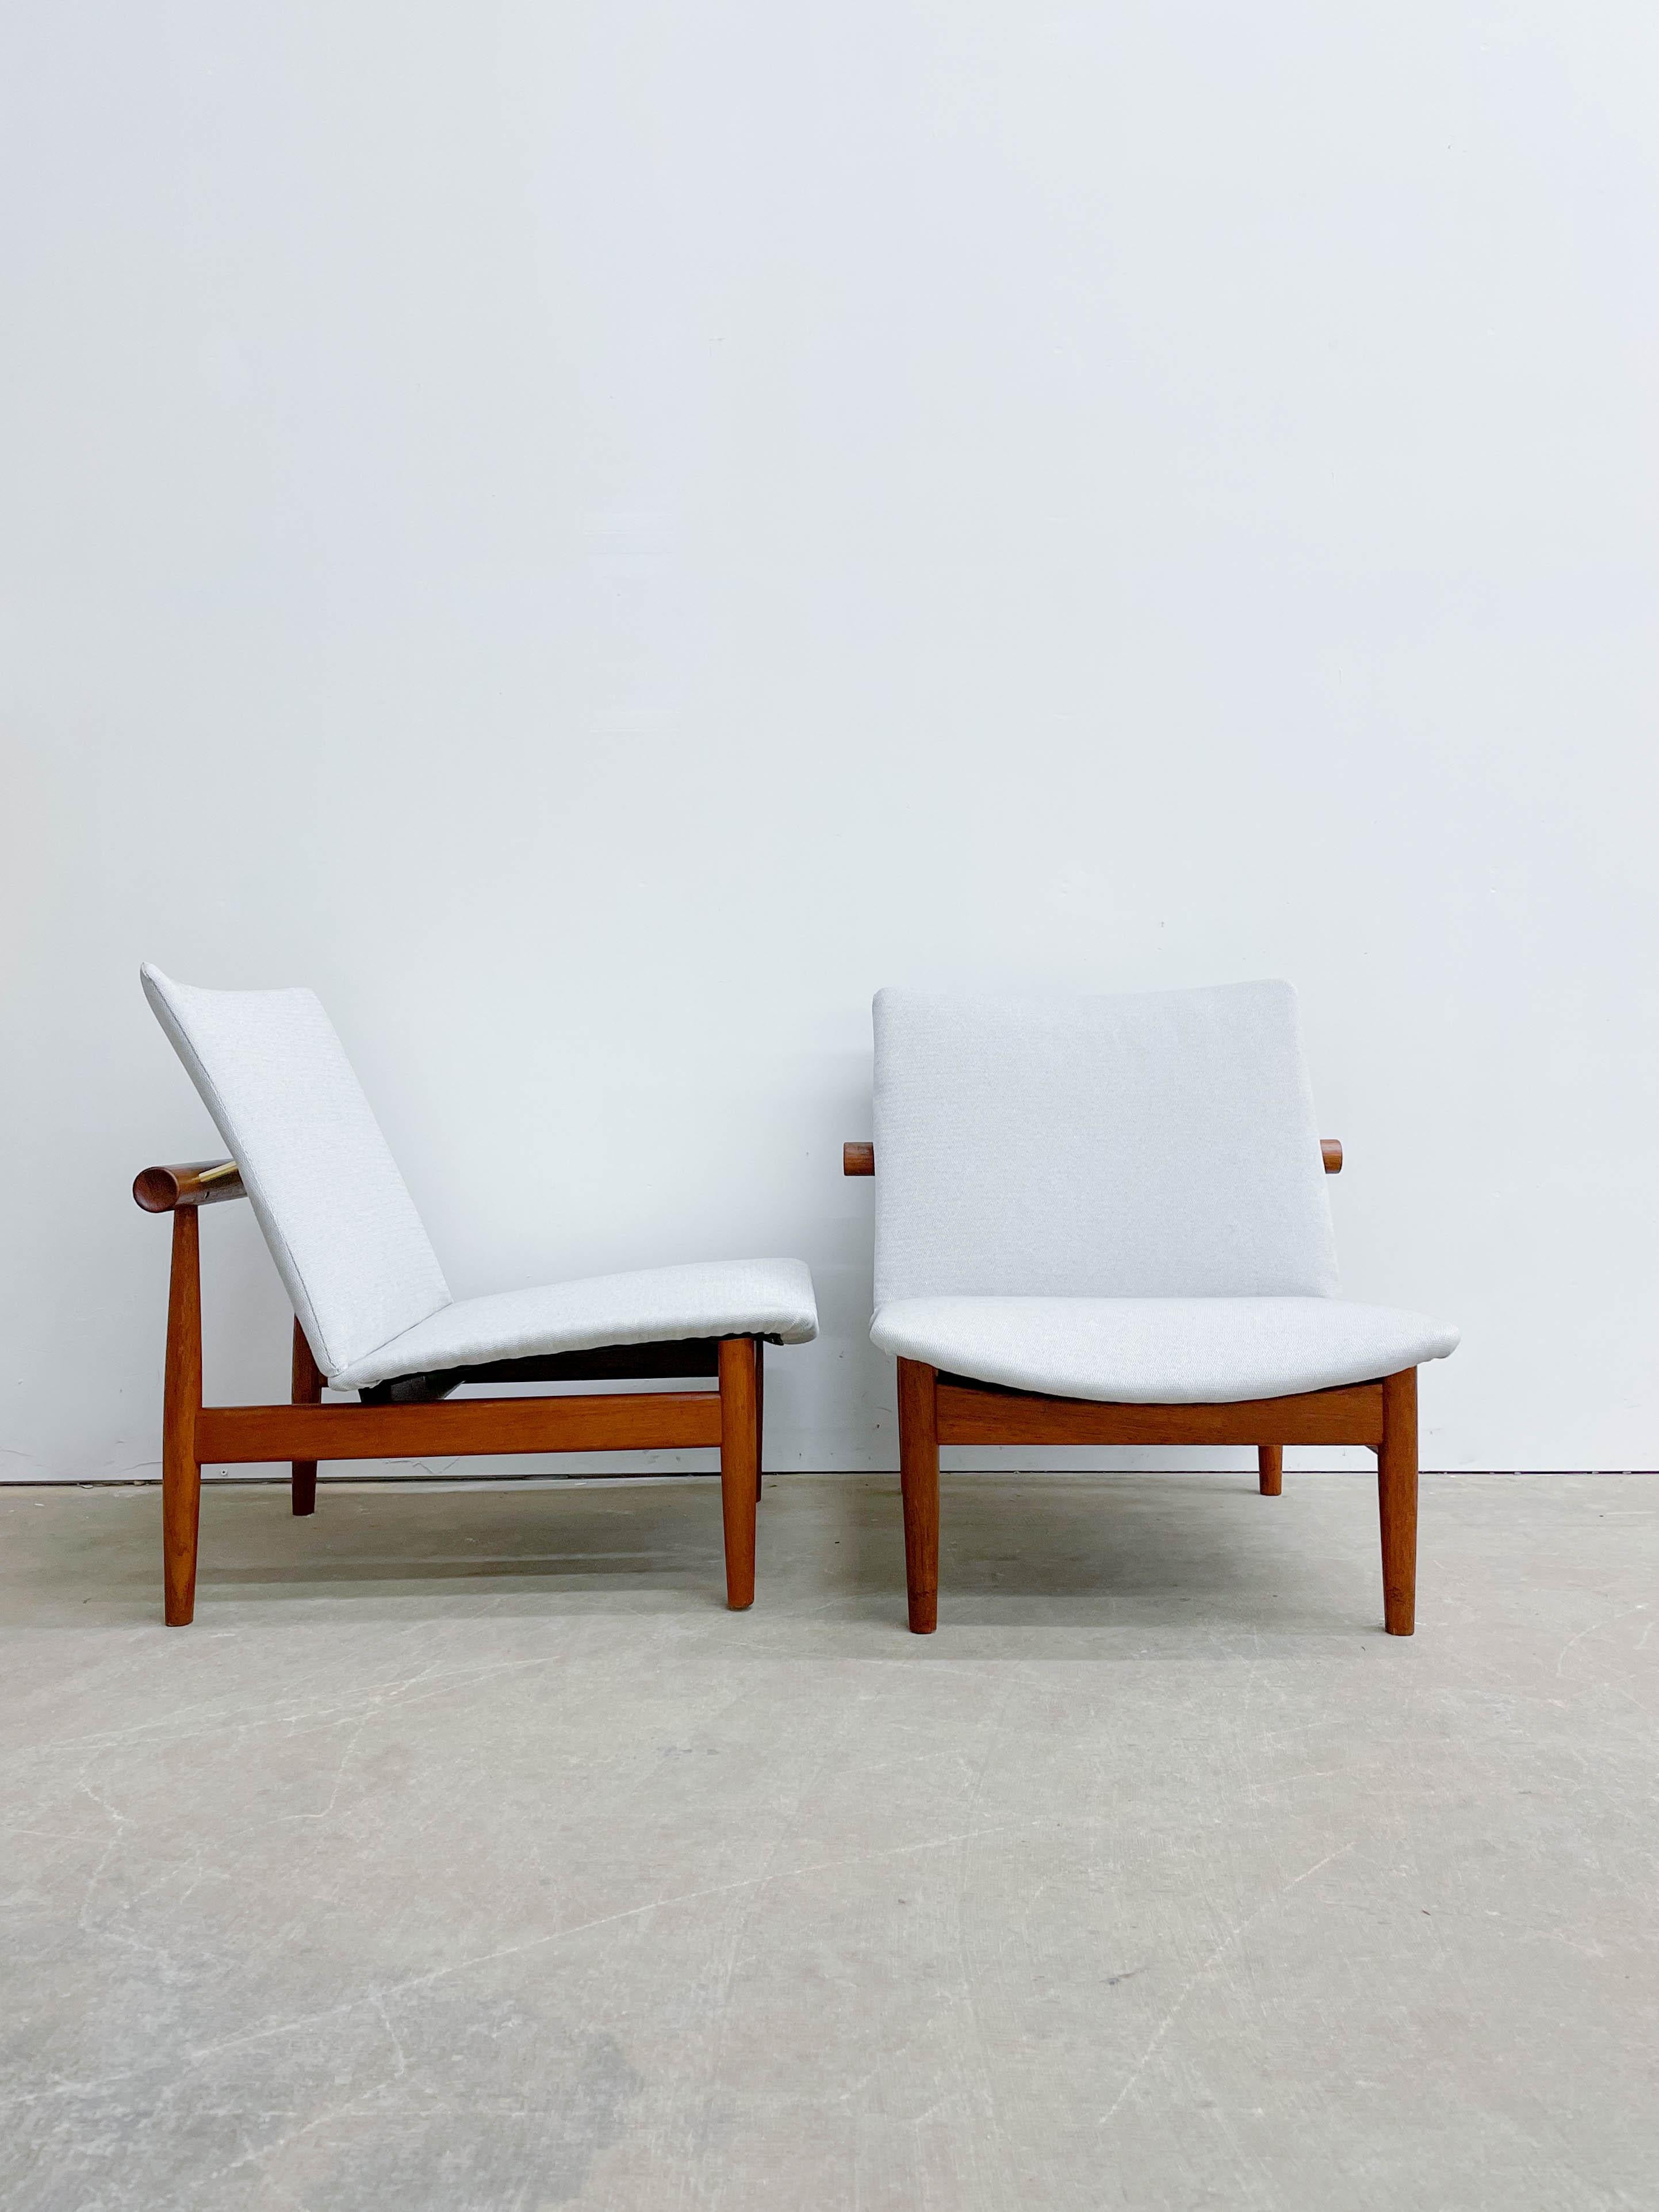 Pair of ‘Japan’ chairs designed by Danish designer Finn Juhl and made by France and Daverkosen in the 1950s. This is a beautiful floating chair design inspired by Torii gates seen outside of Japanese temples -- hence the name! The chair, although a